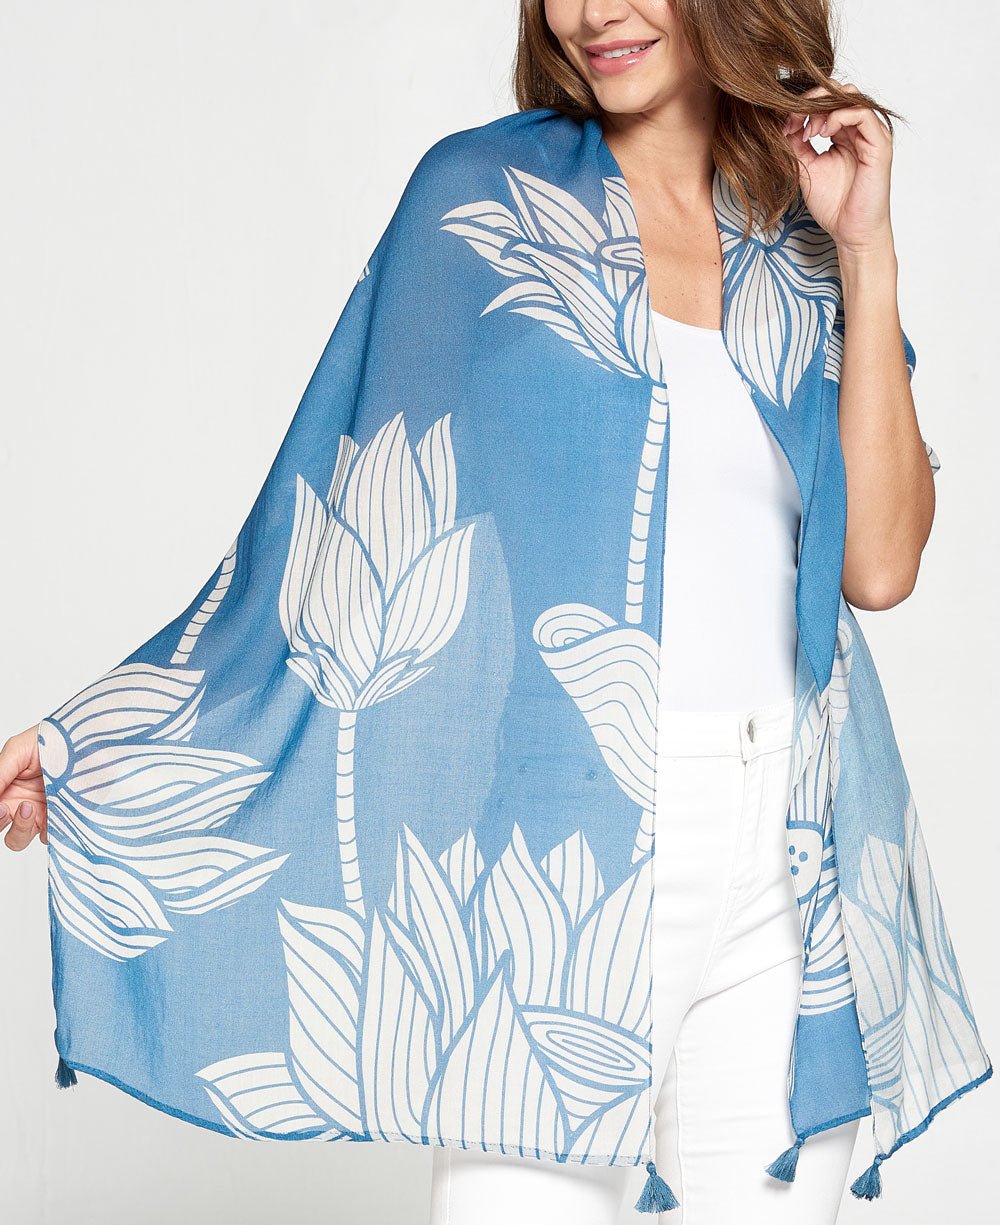 Blue And White Lotus Print Scarf - Scarves